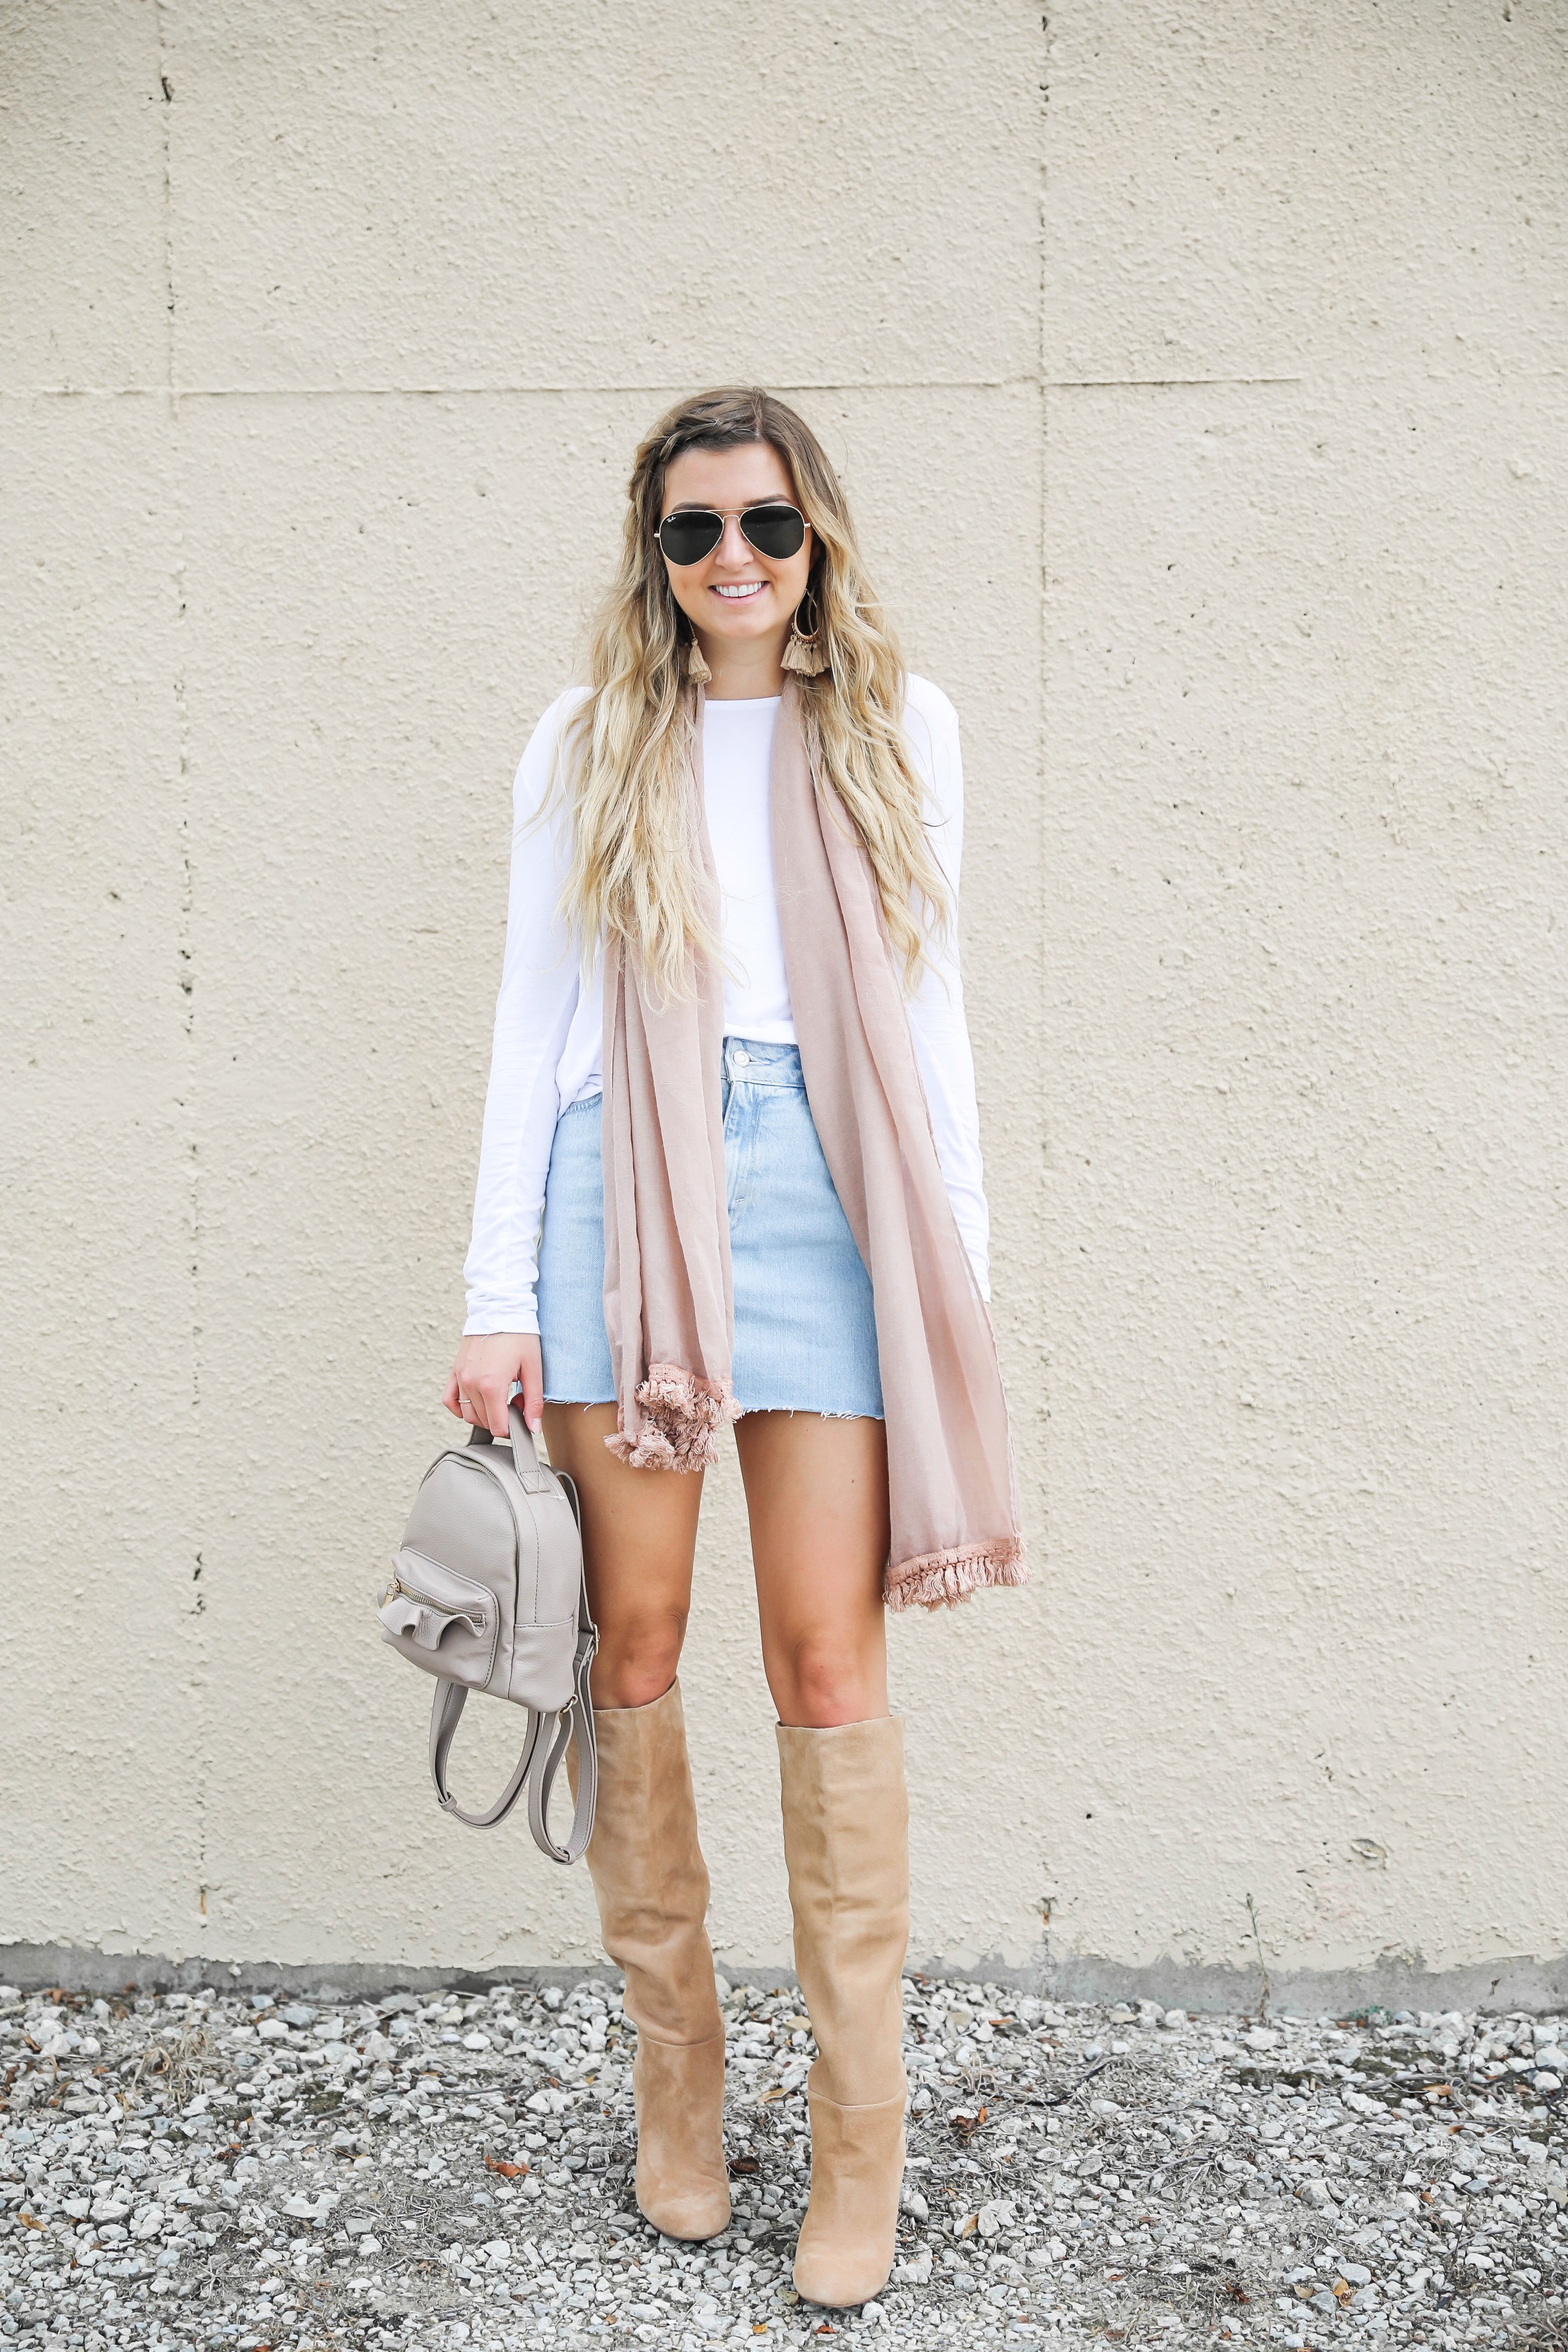 Light denim skirt with a long sleeve white t-shirt! The white t-shirt is open back and only $15! I am obsessed with this pink fringe scarf and these tan booties that totally complete the fall outfit! Details on daily dose of charm by lauren lindmark